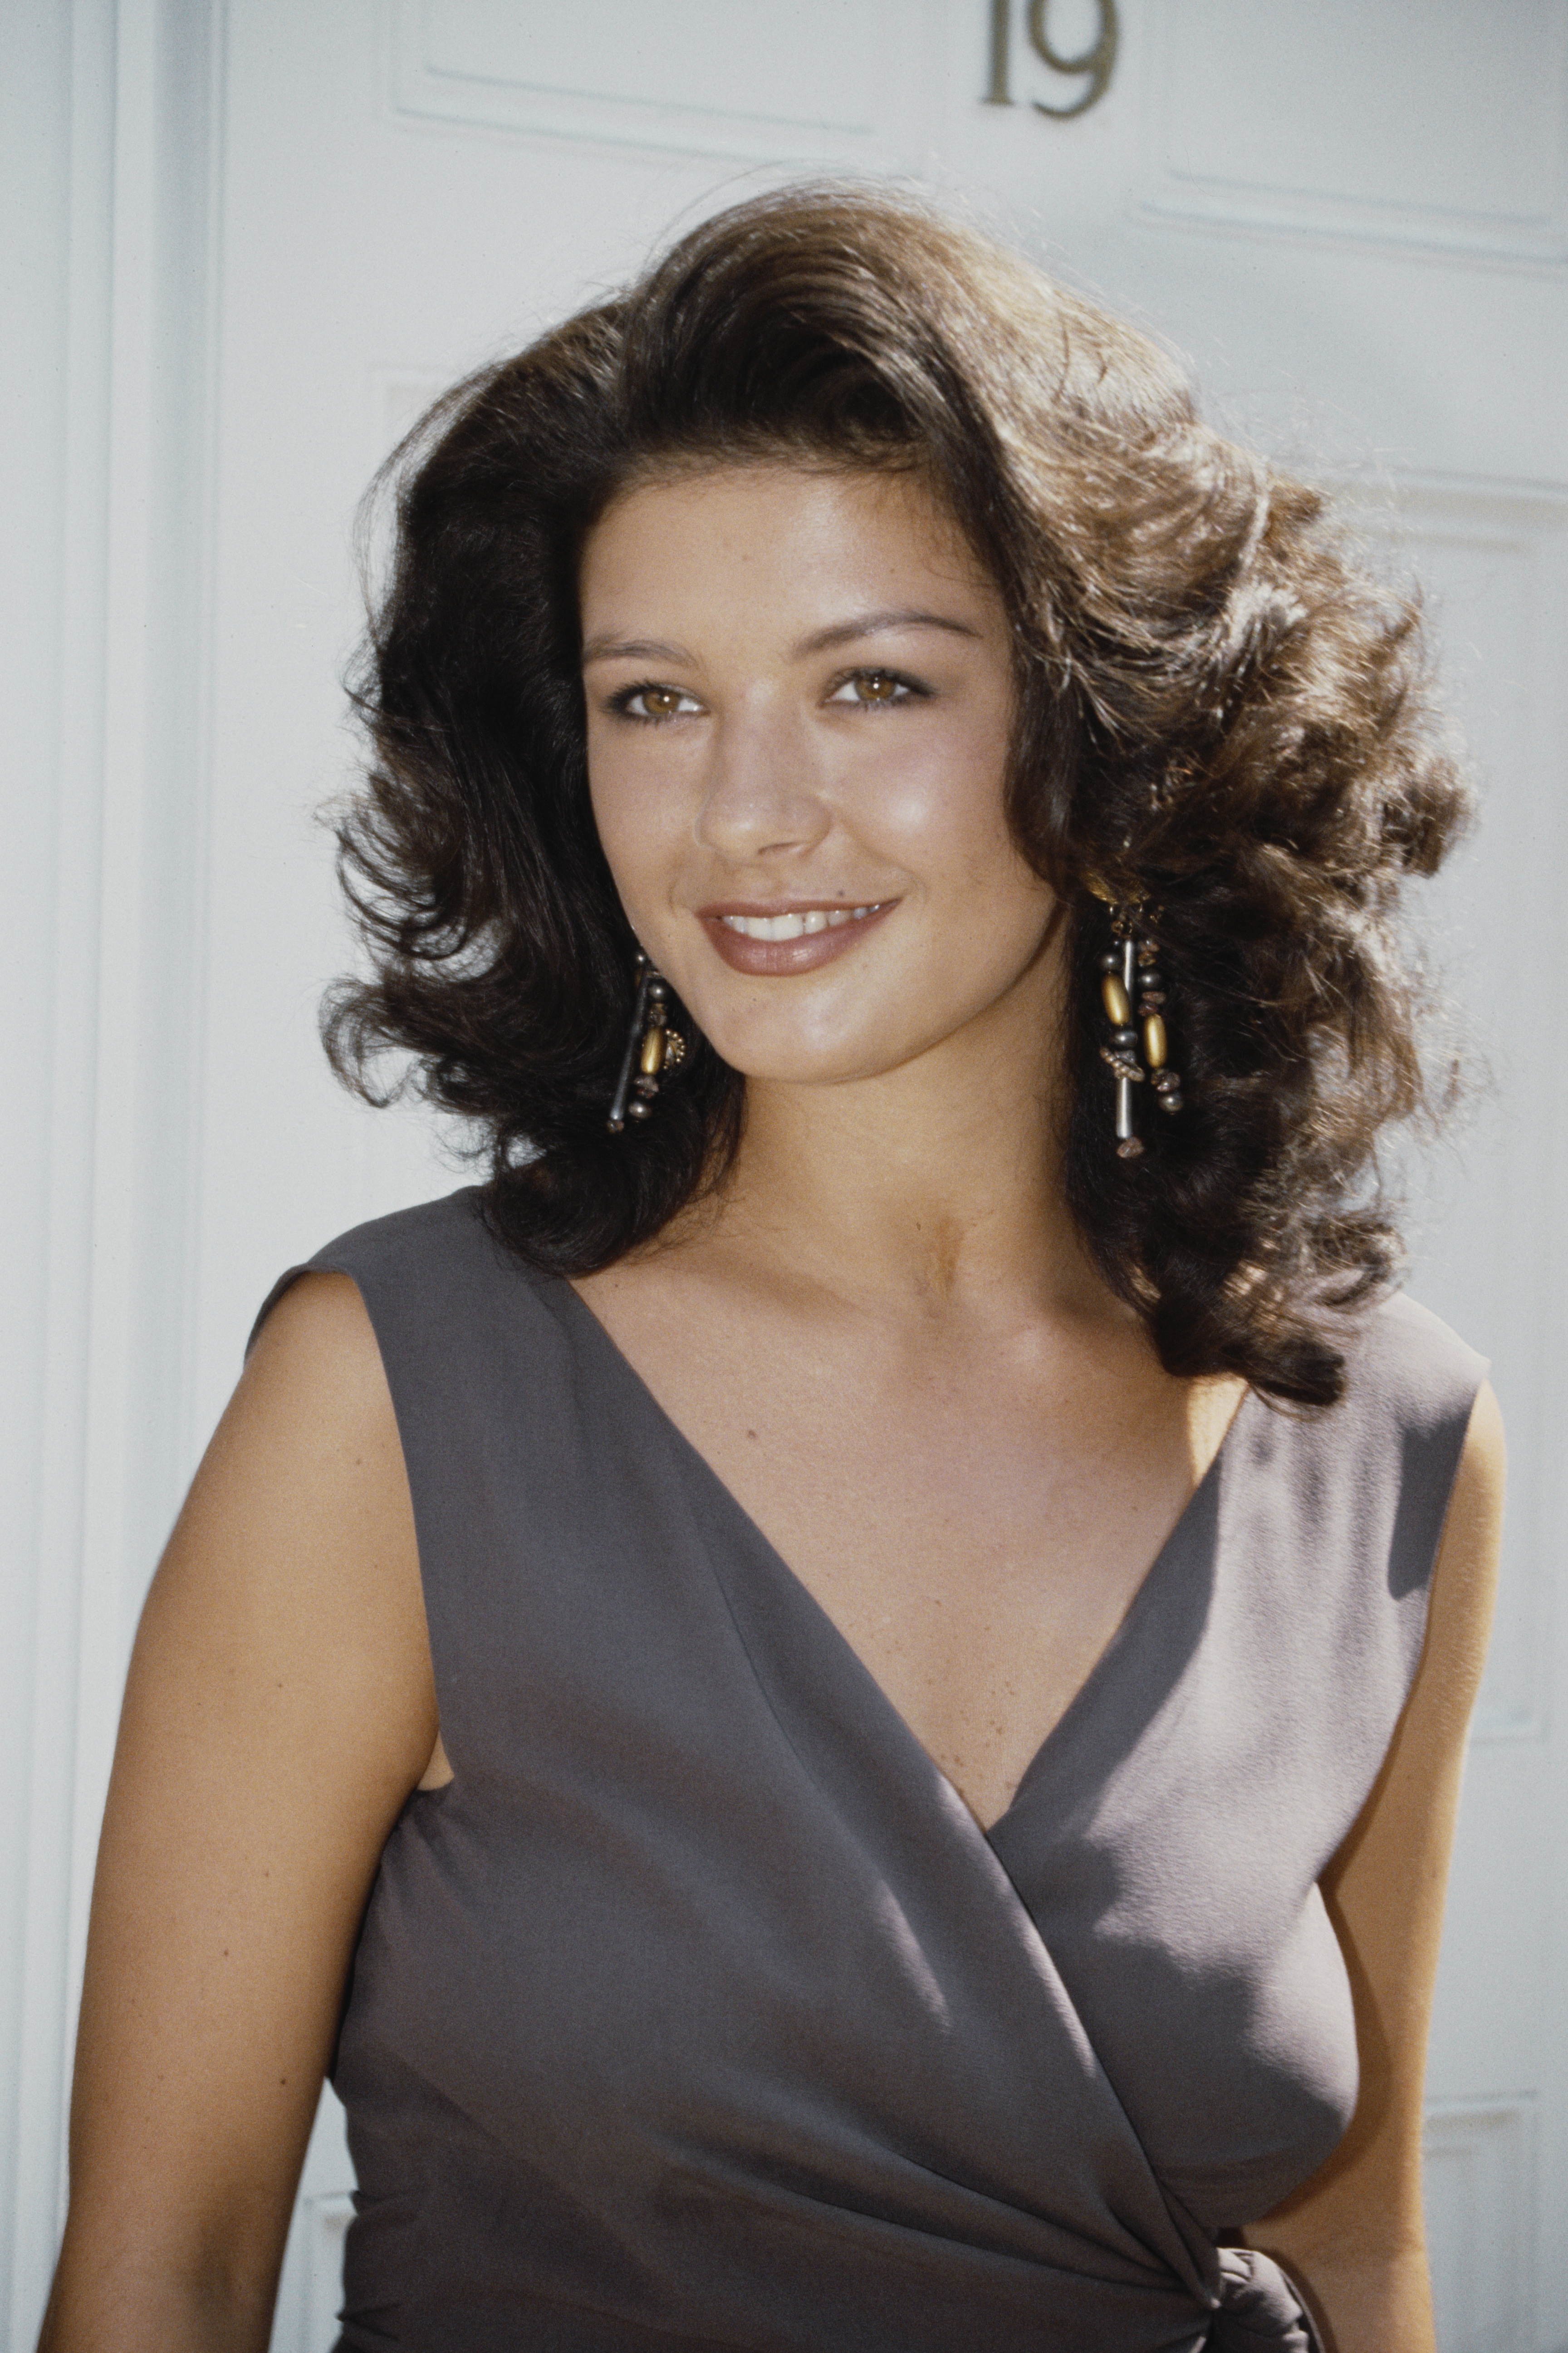 Welsh actress Catherine Zeta-Jones, who played the role of Mariette in the television drama series "The Darling Buds of May," pictured circa 1991. | Source: Getty Images